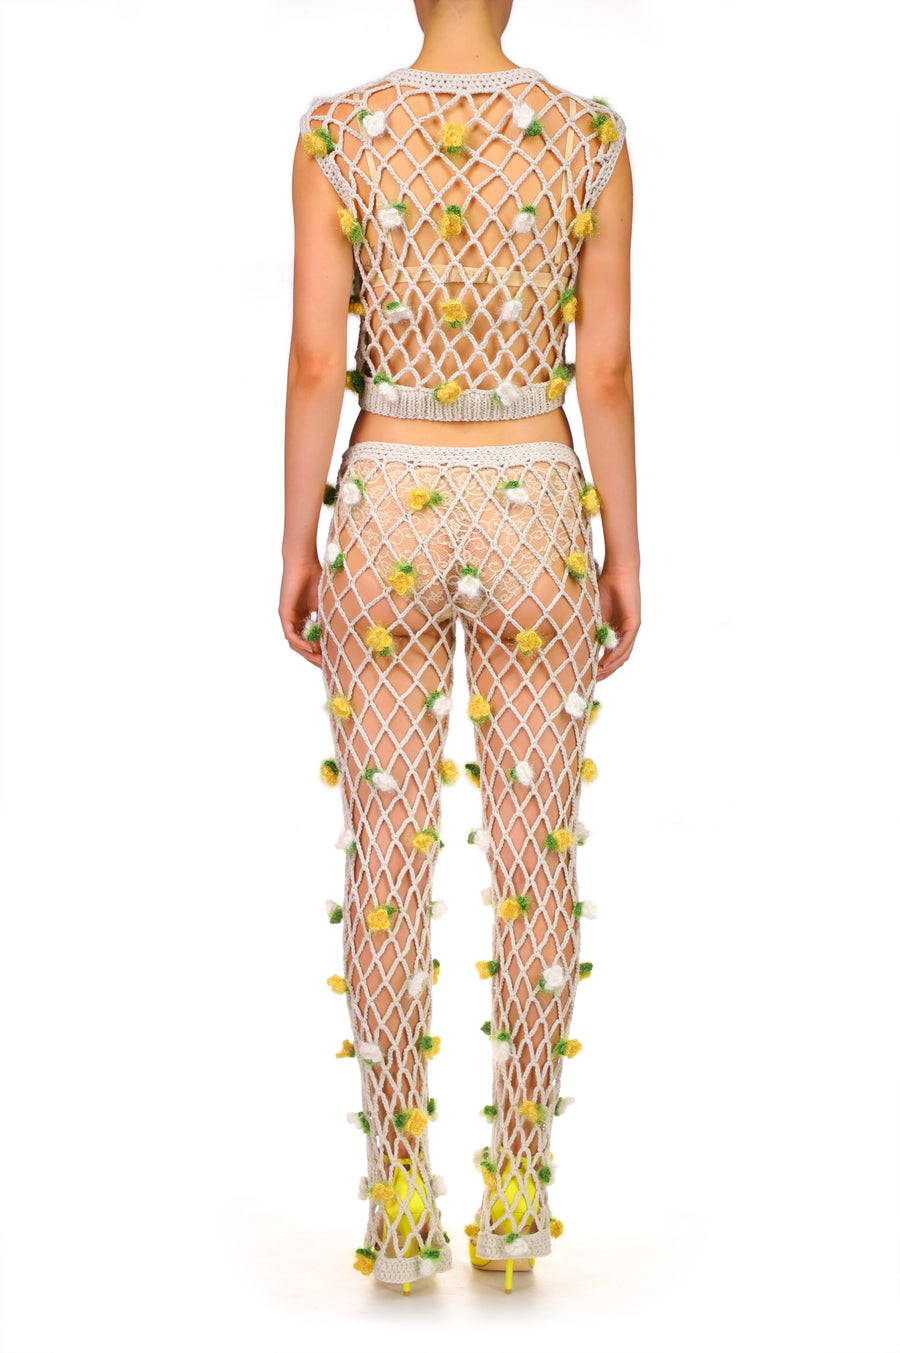 Hand Crochet Pants With White And Yellow Flowers